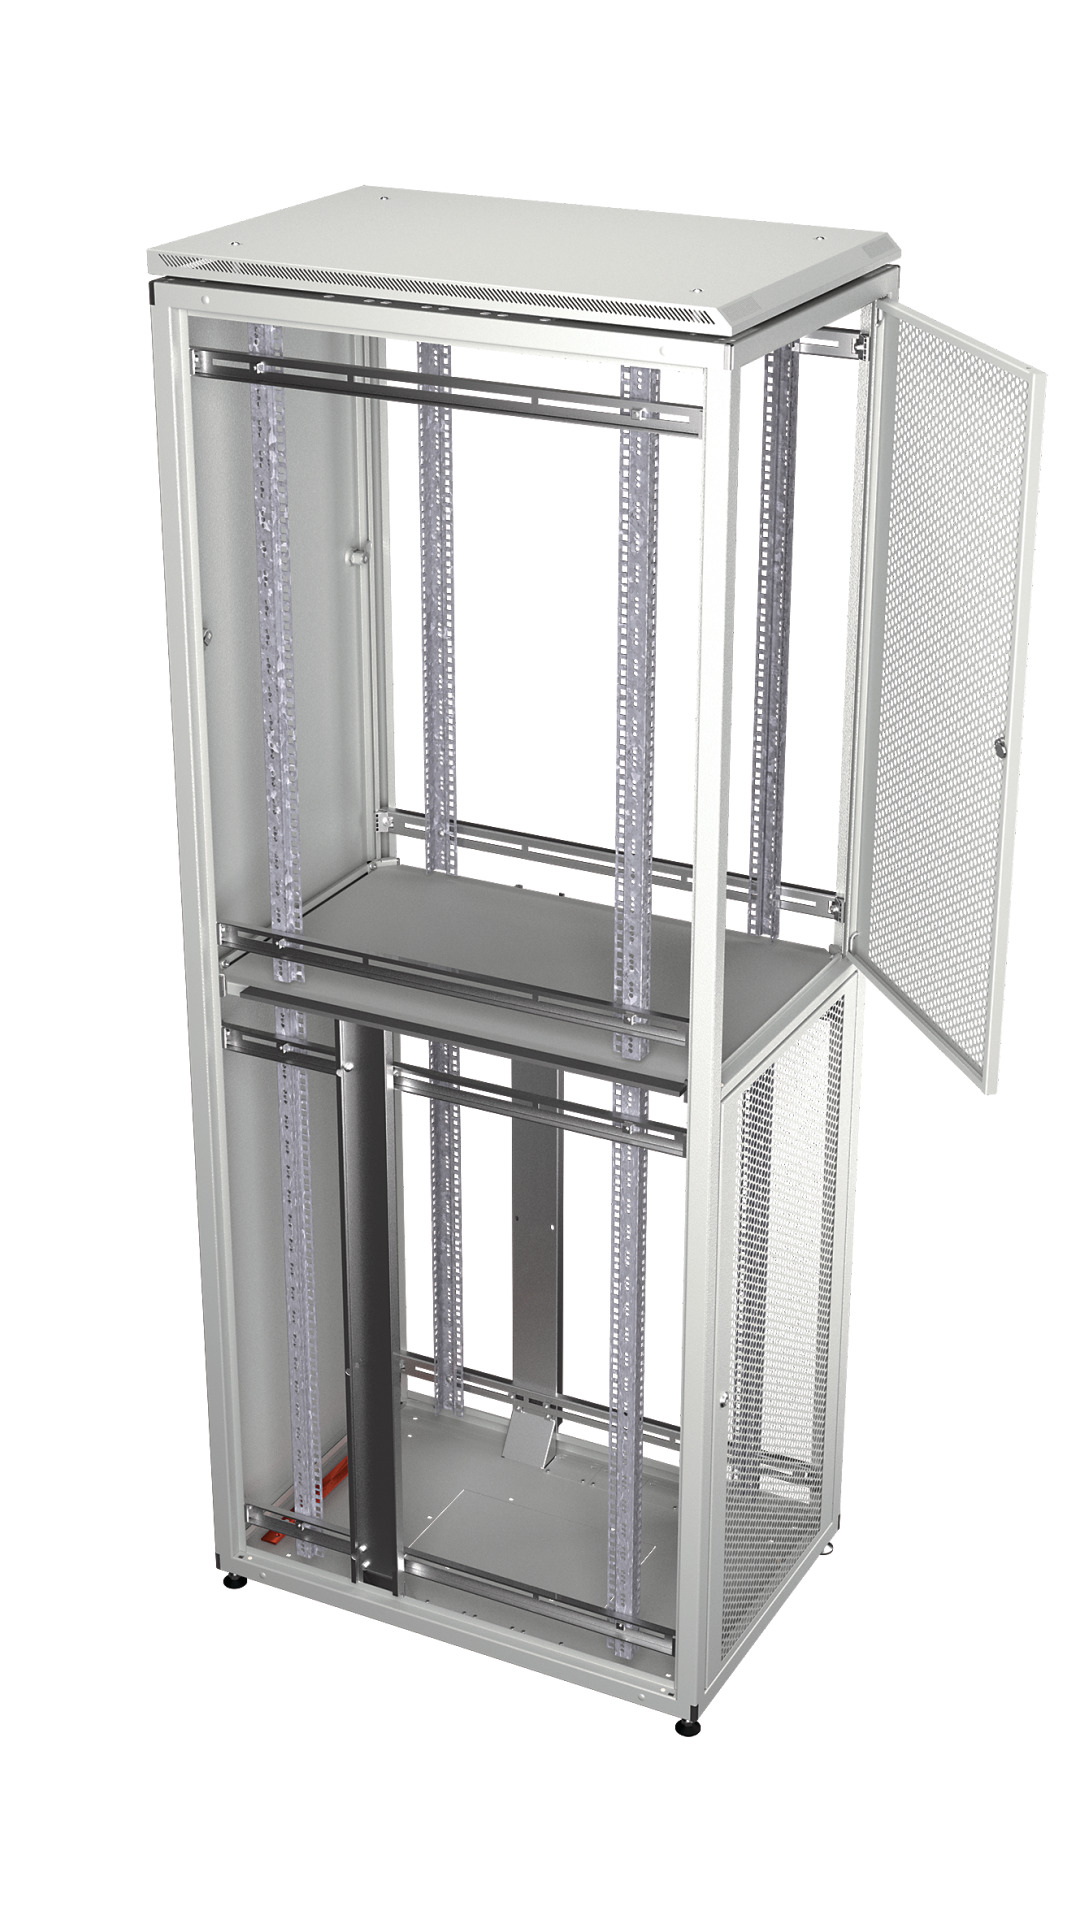 Co-Location Rack PRO, 4 x 10HE, 600x800 mm, F+R 1-tlg. perforiert, RAL9005